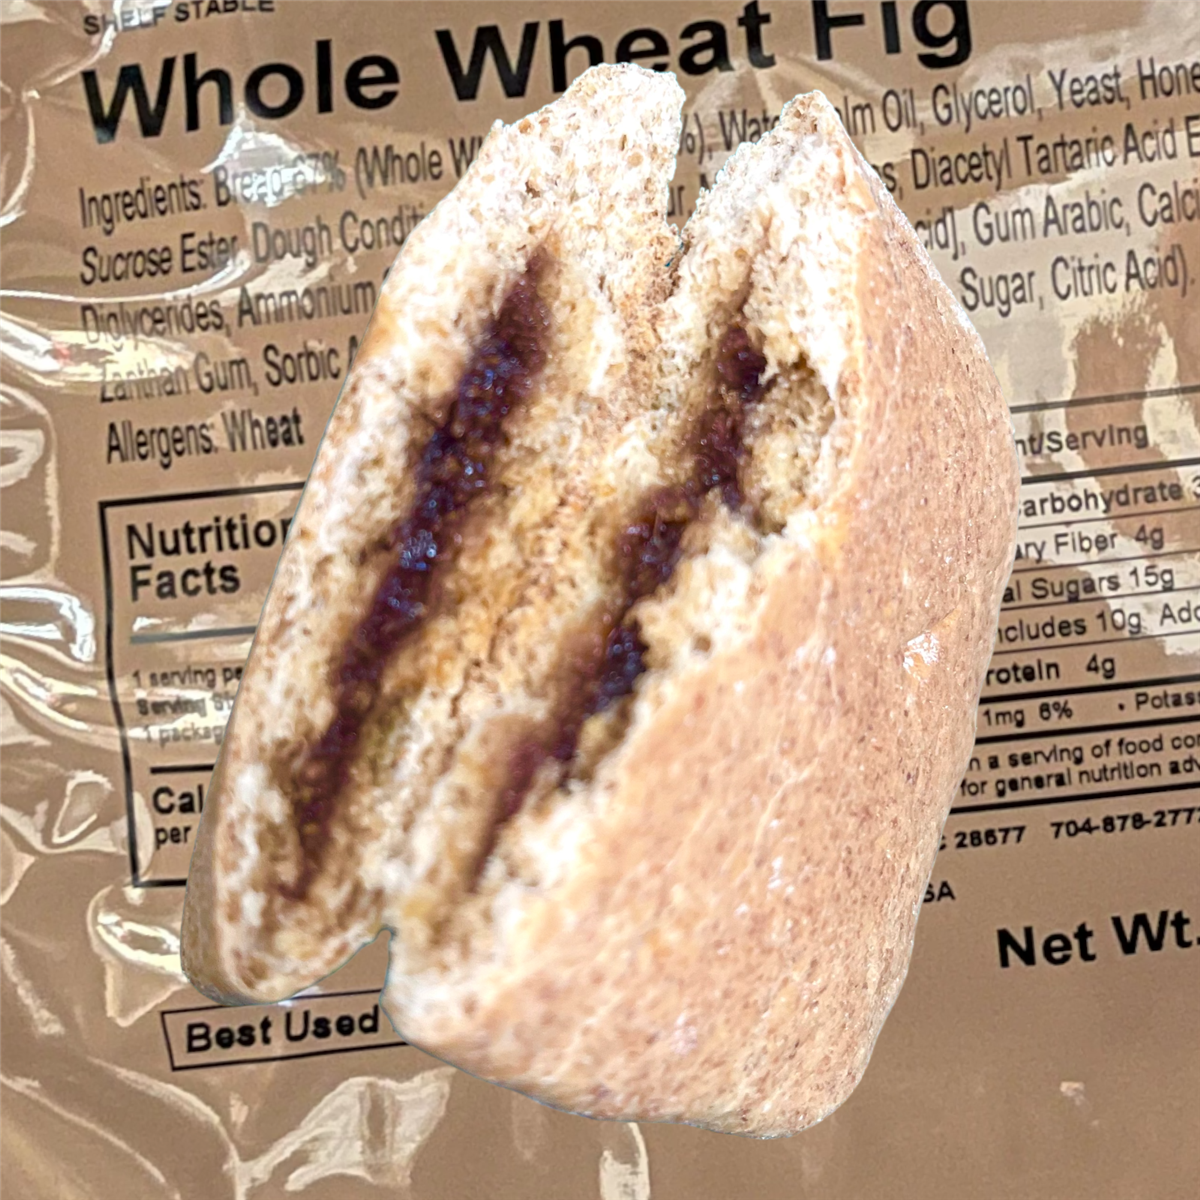 MRE Fig in Whole Wheat Bread by Bridgford